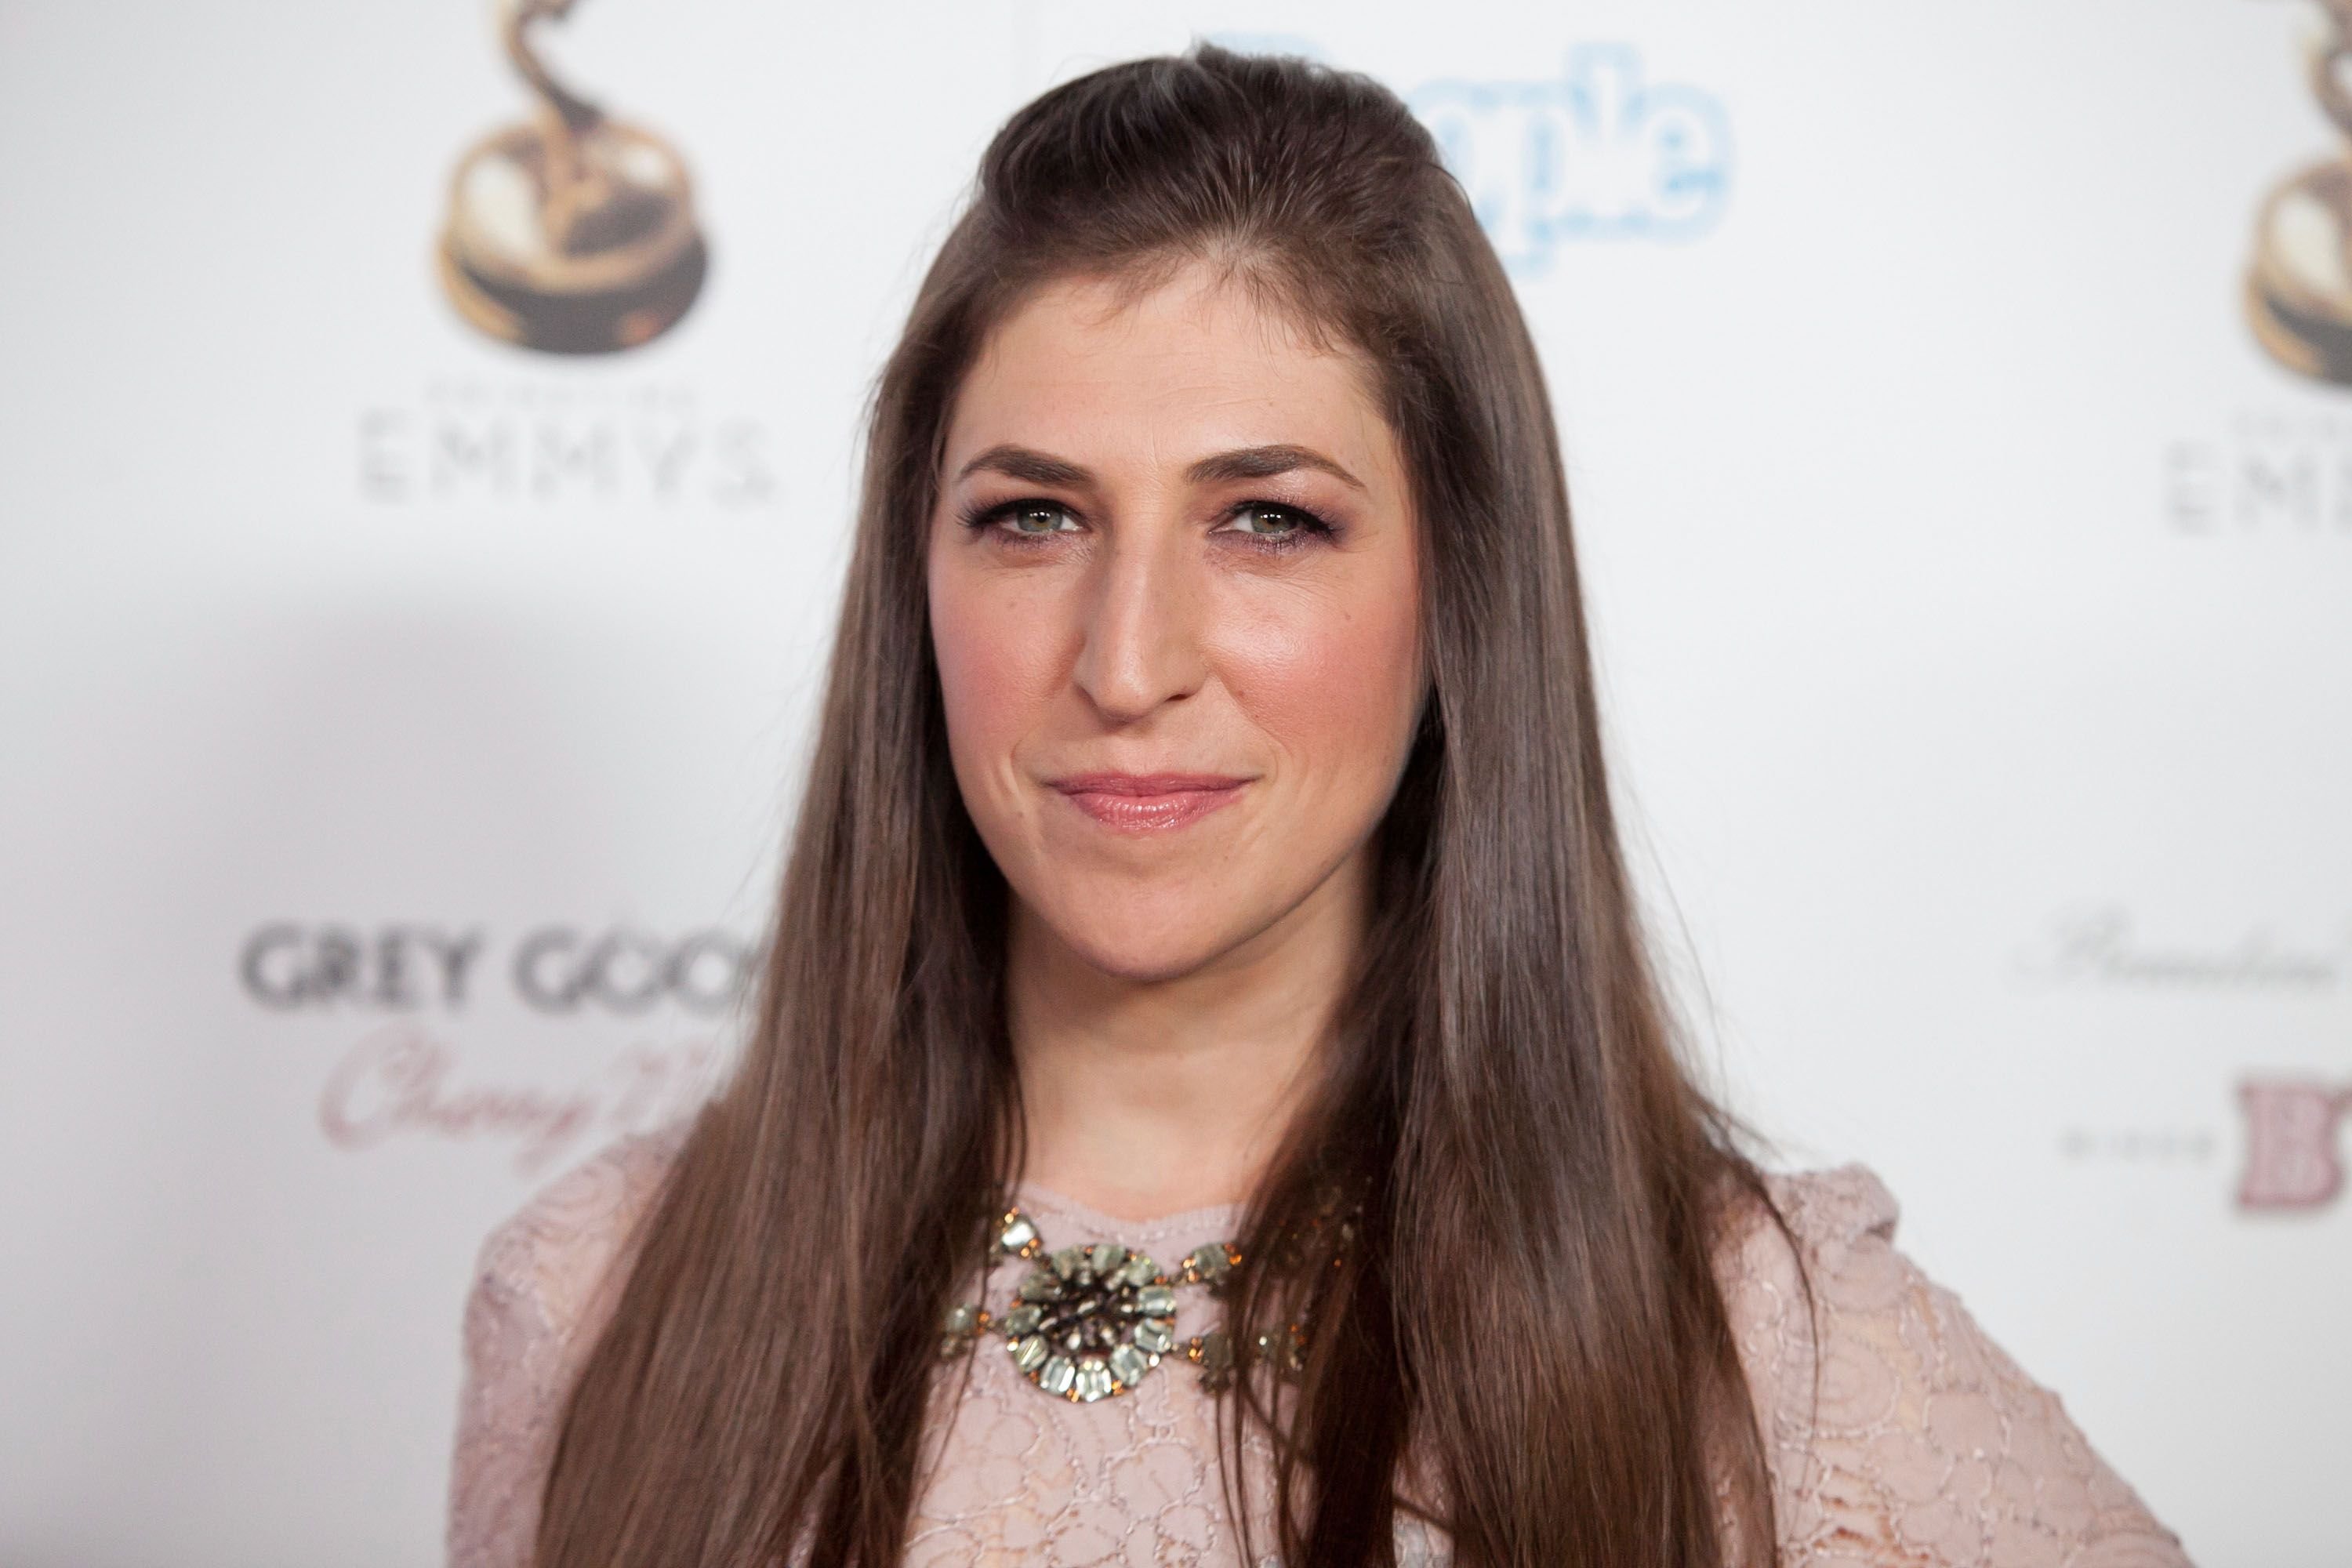 Mayim Bialik at The Academy of Television Arts & Sciences Performer Nominees' 64th Primetime Emmy Awards Reception on September 21, 2012, in West Hollywood, California | Photo: Imeh Akpanudosen/Getty Images